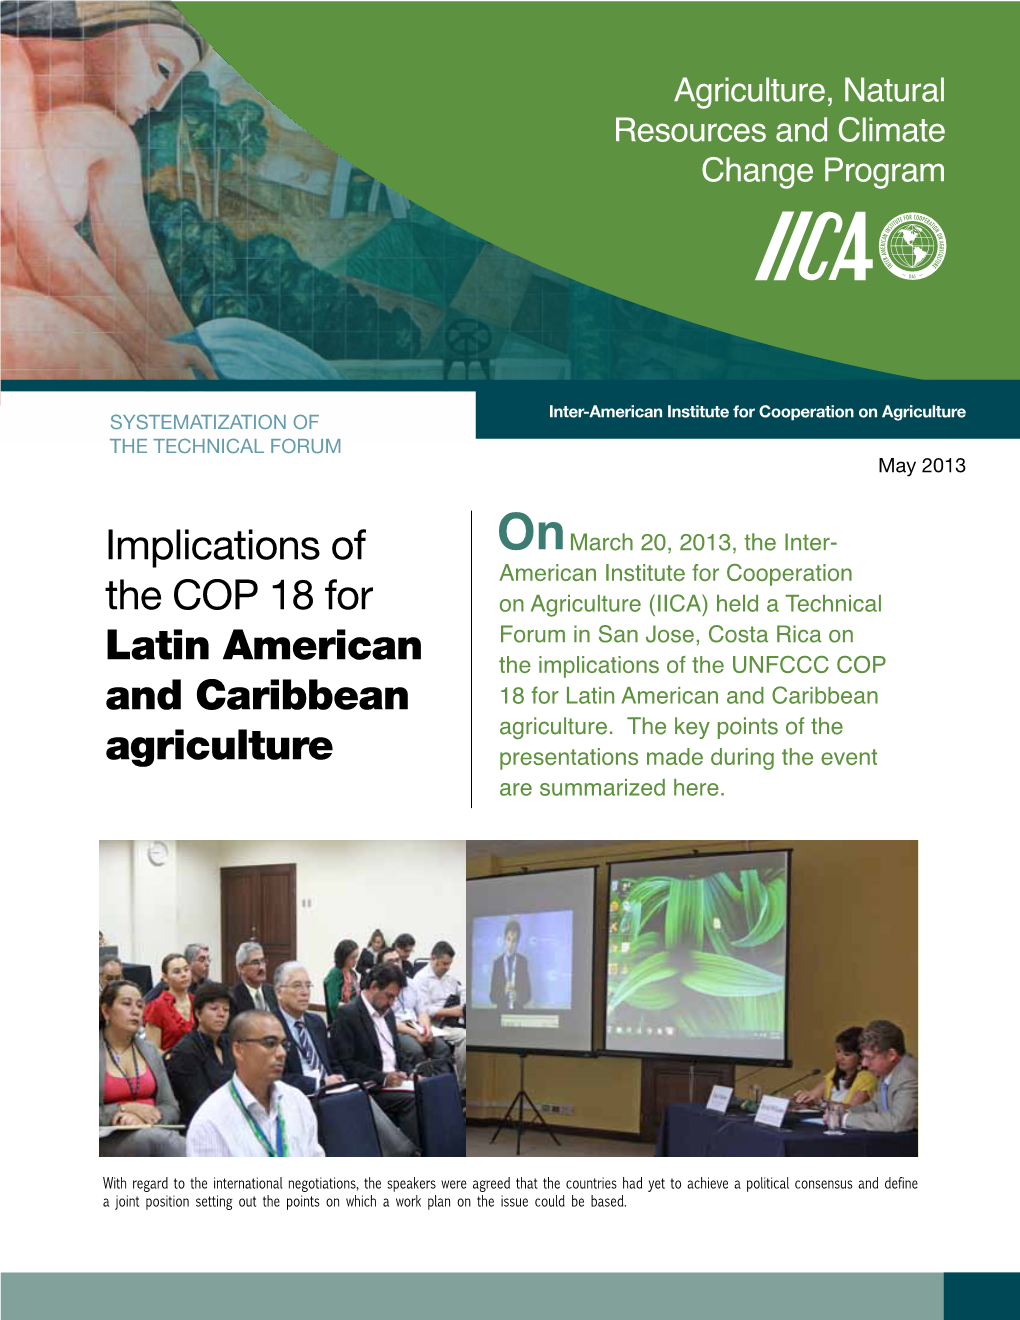 Implications of the COP 18 for Latin American and Caribbean Agriculture